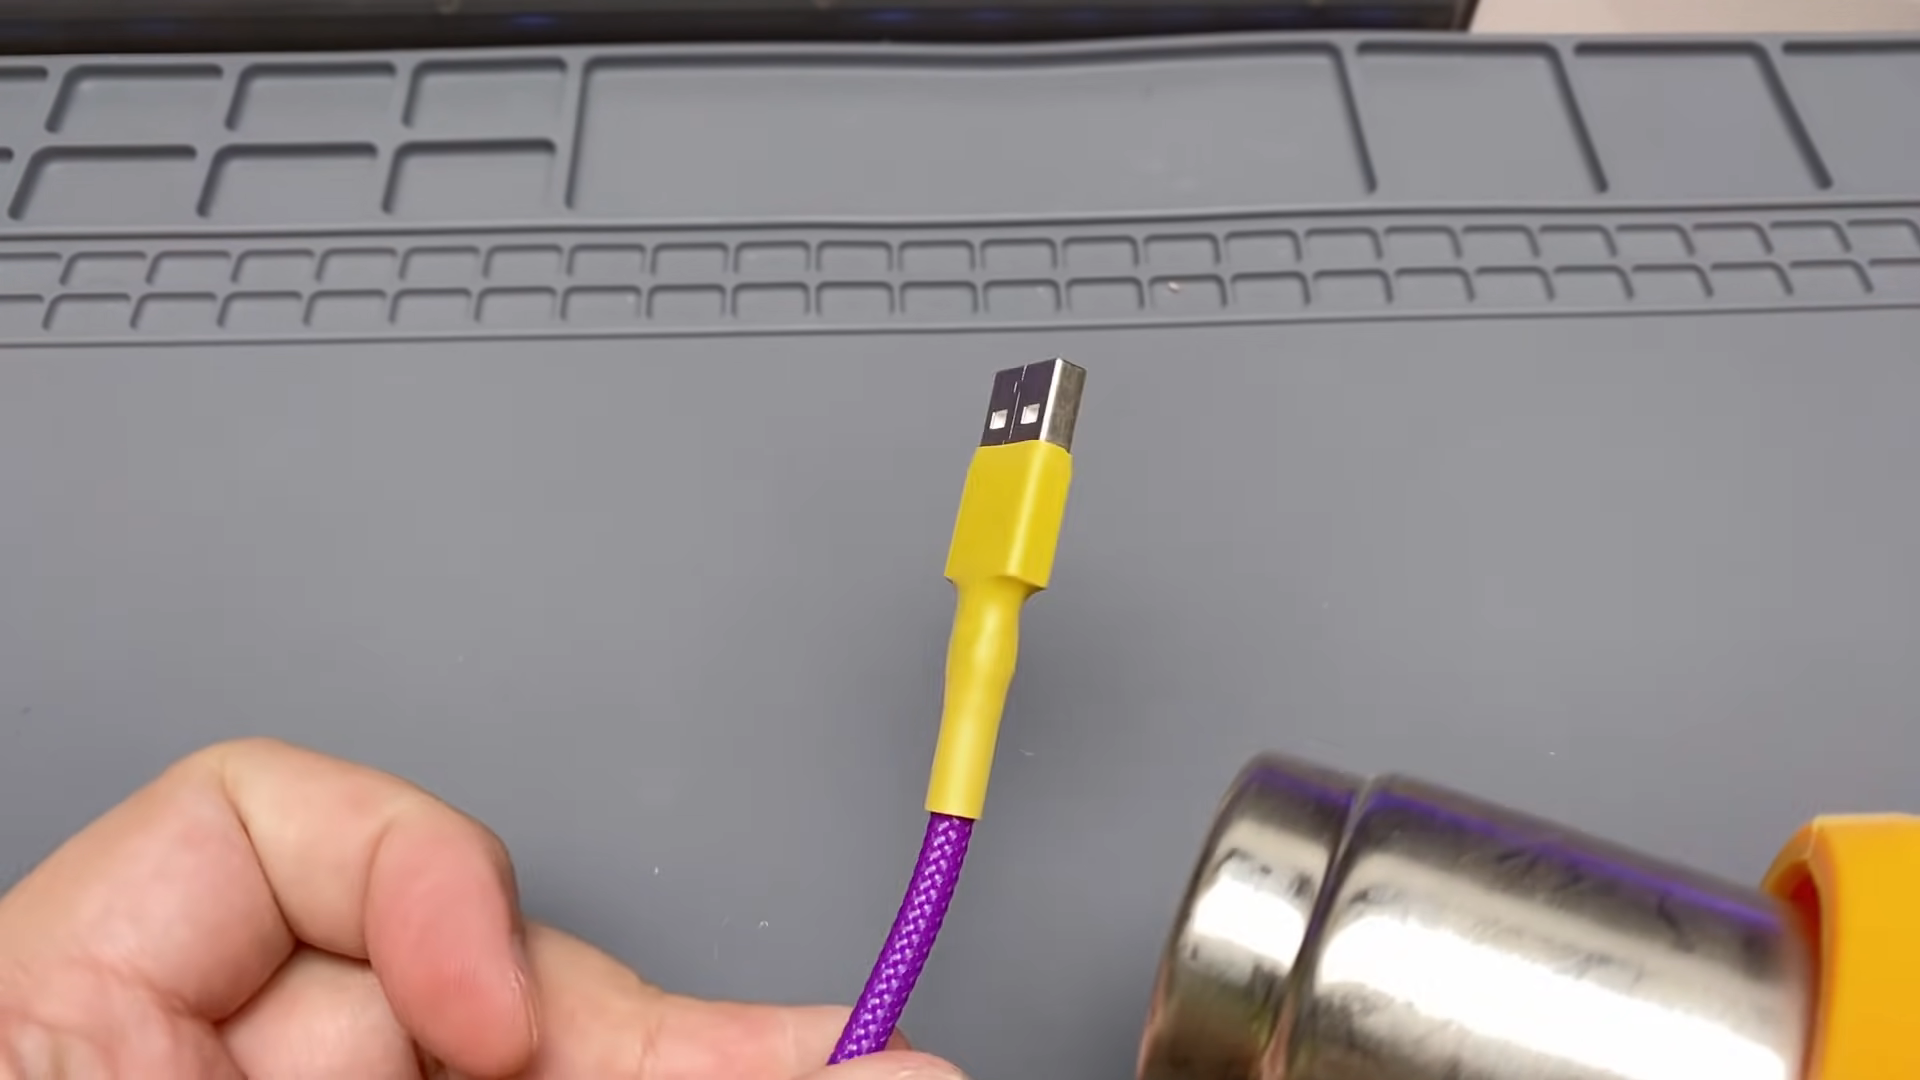 How to Fix a Charger Cord That Won't Charge Any More